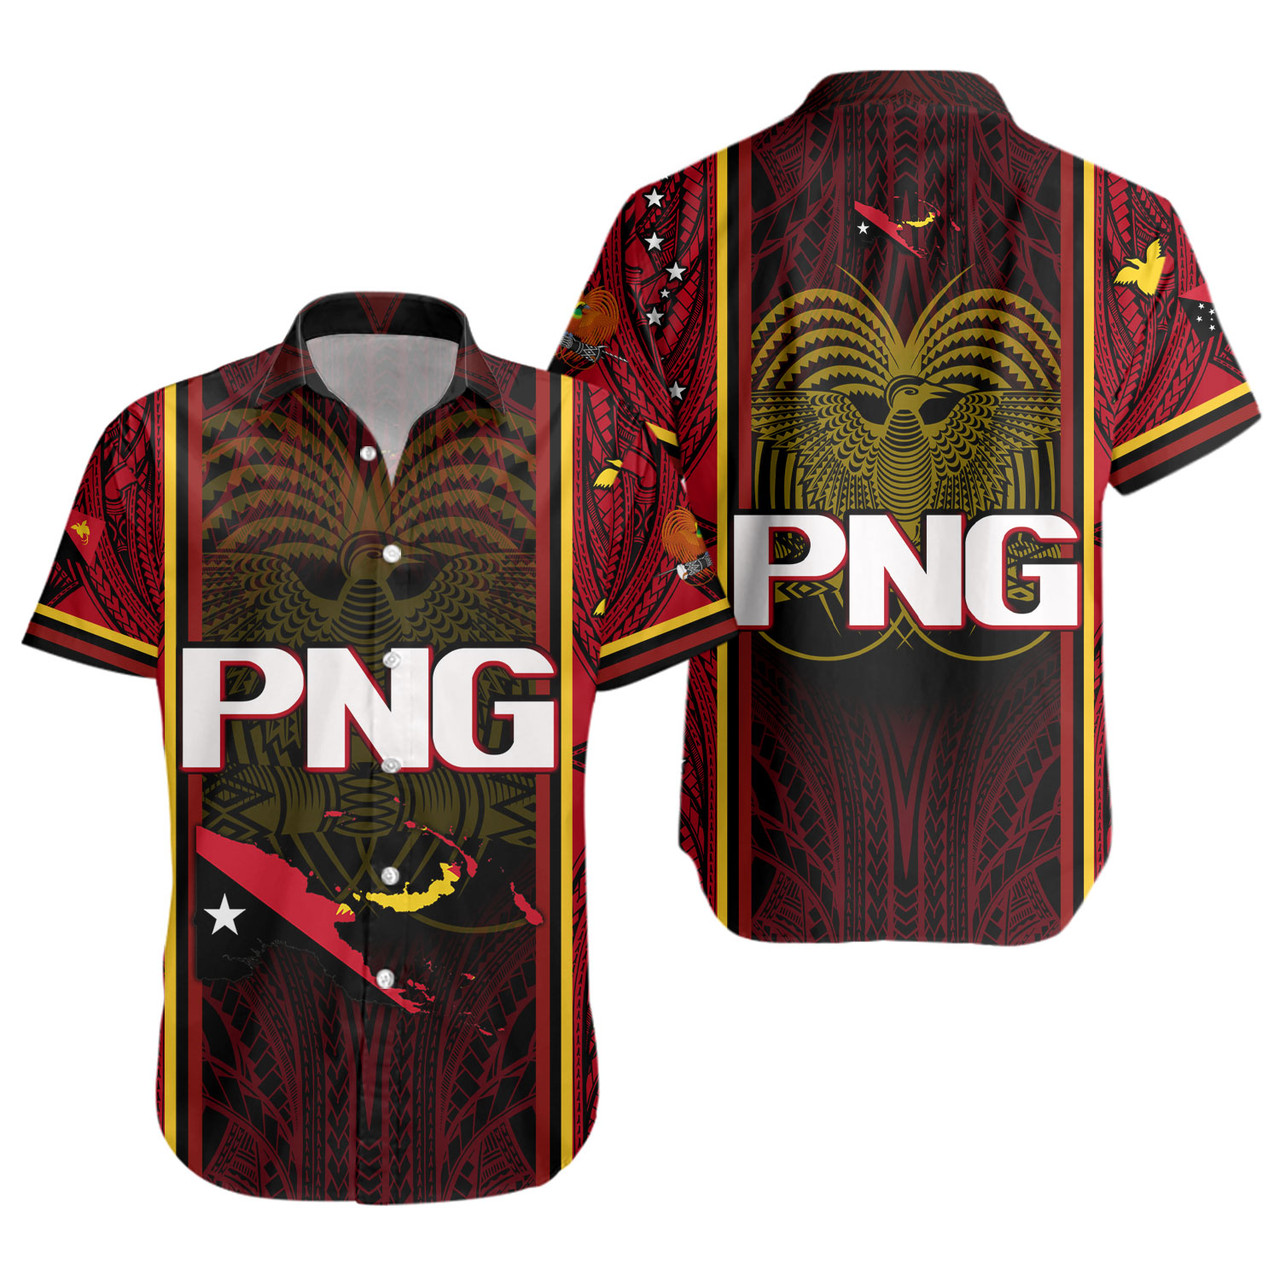 Papua New Guinea Custom Personalised Short Sleeve Shirt  Seal And Map Tribal Traditional Patterns